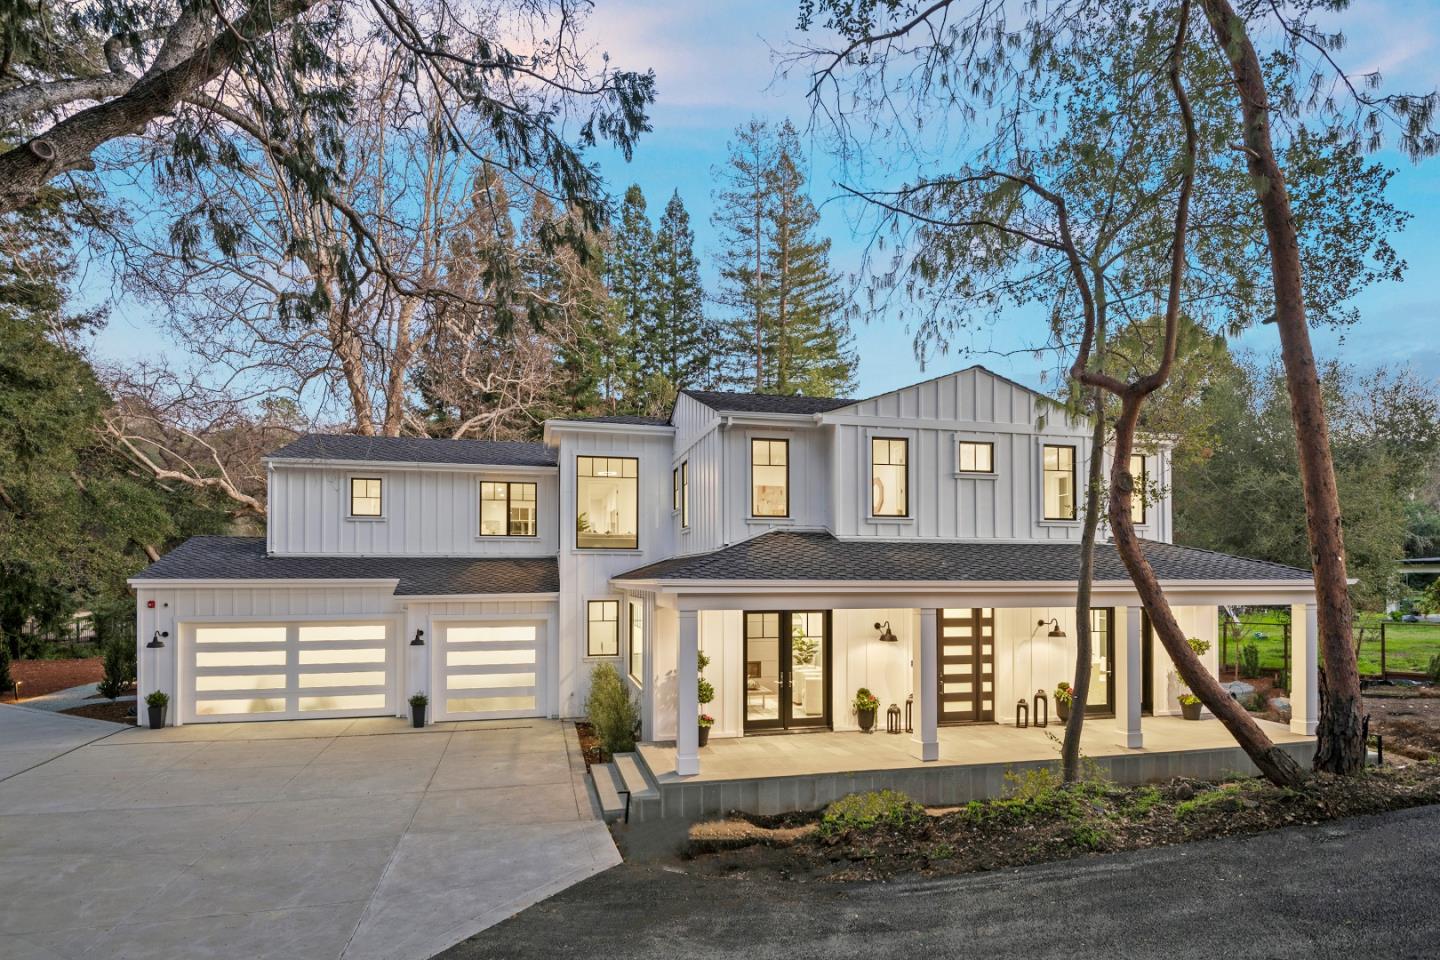 Fabulous New Construction in Saratoga Schools. Napa style Farmhouse with a contemporary flair. Builder Steve Scates has produced another high quality, beautifully designed home w/ exceptional finishes. Set upon a tranquil and picturesque environment that is sunny and bright accented by a stunning Redwood Grove. This 5 bedroom, 5 bath, 4,560 sf +/- masterpiece boast formal dining and living rooms, spacious butlers pantry, fabulous great room kitchen with high ceilings and a downstairs bedroom suite. The upstairs primary suite and 3 additional bedrooms are all en-suite. Outdoor living w/ spacious Connecticut Blue Stone patio with garden and play areas. 3 car garage. Features incl: Home automation (audio-visual-security and system management), Cleaf cabinetry, NeoLith counters, Blue glass enclosures, Emtek hardware, Fry Reglet trim profile throughout, Viking Pro 7 Series appliances, Hansgrohe, Brizo, Toto, Kohler and Graff plumbing fixtures and more!